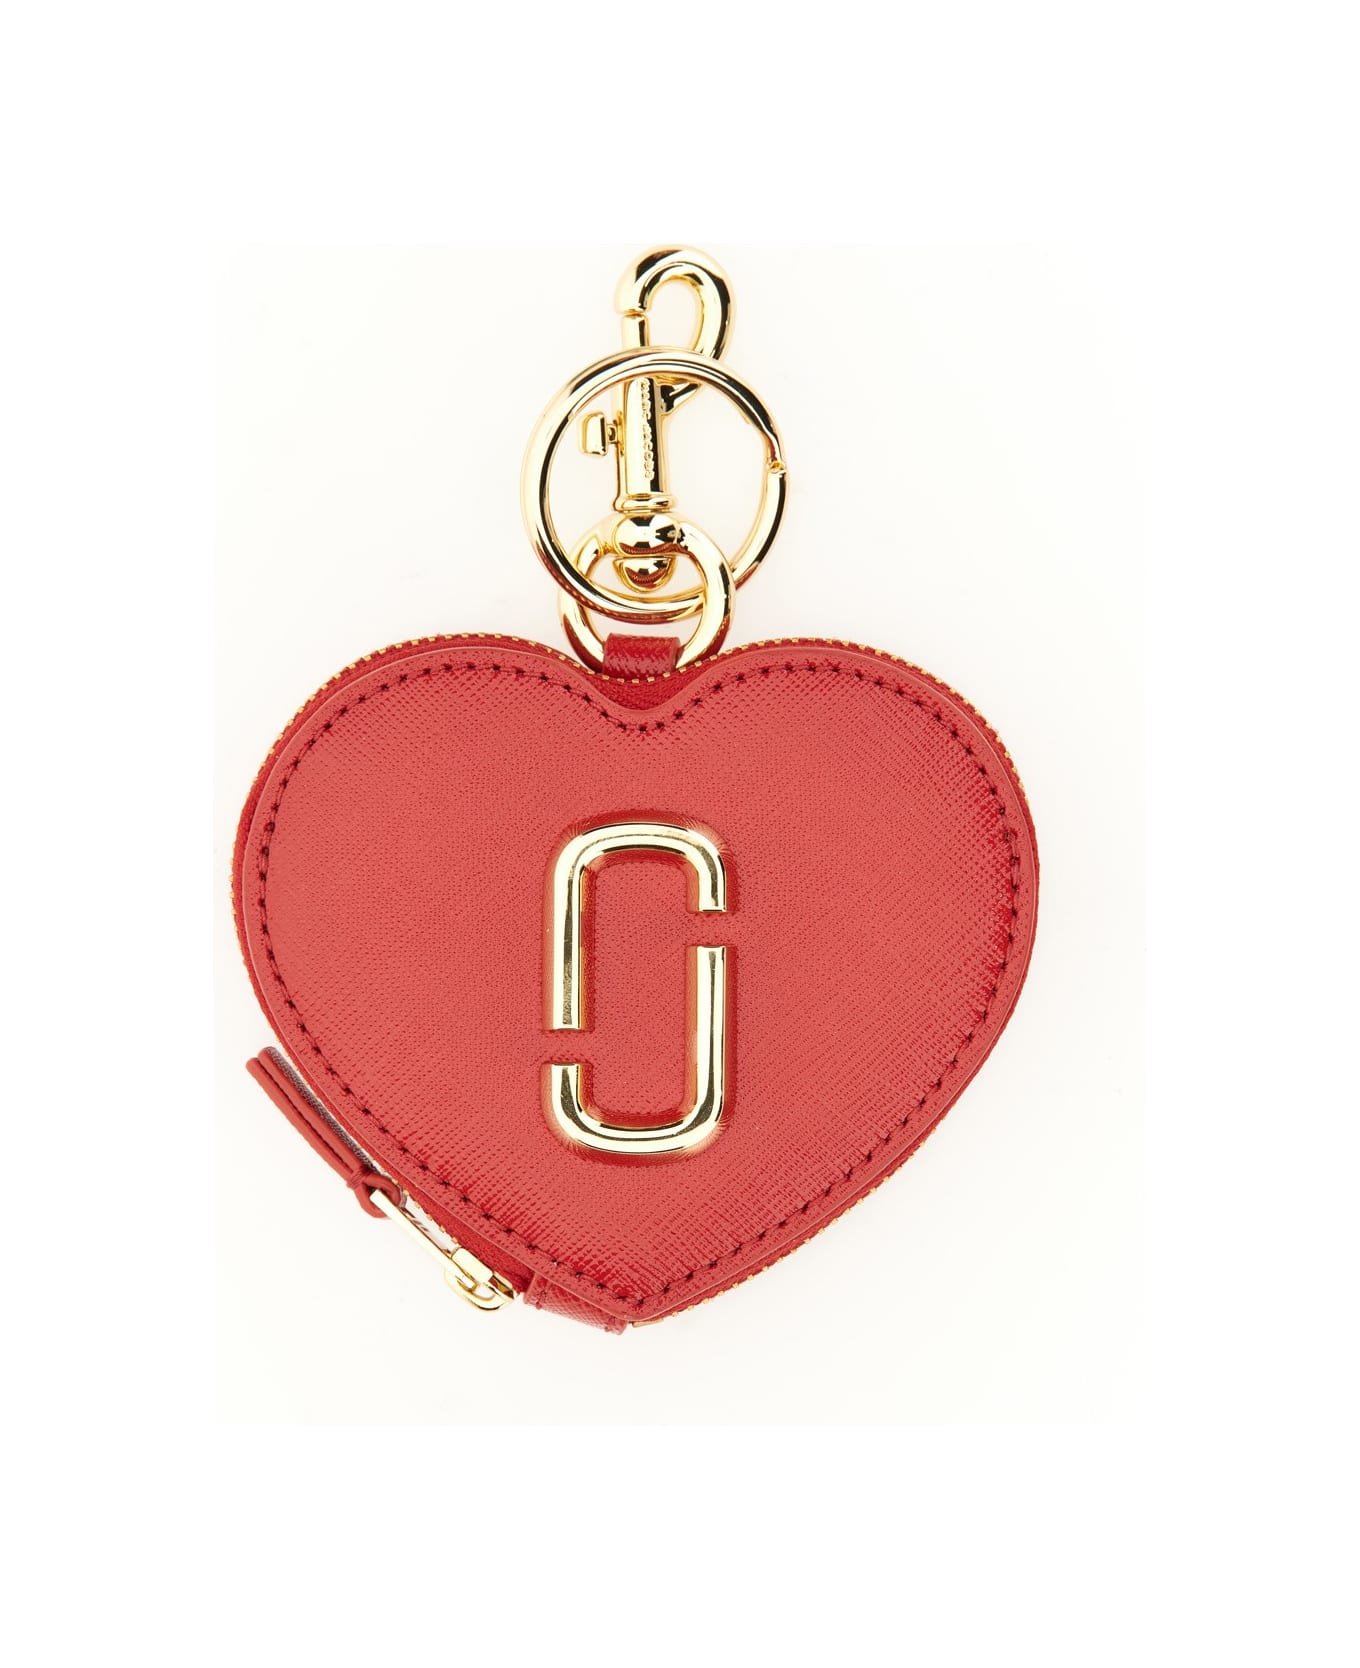 Marc Jacobs Pouch The Heart - True Red クラッチバッグ